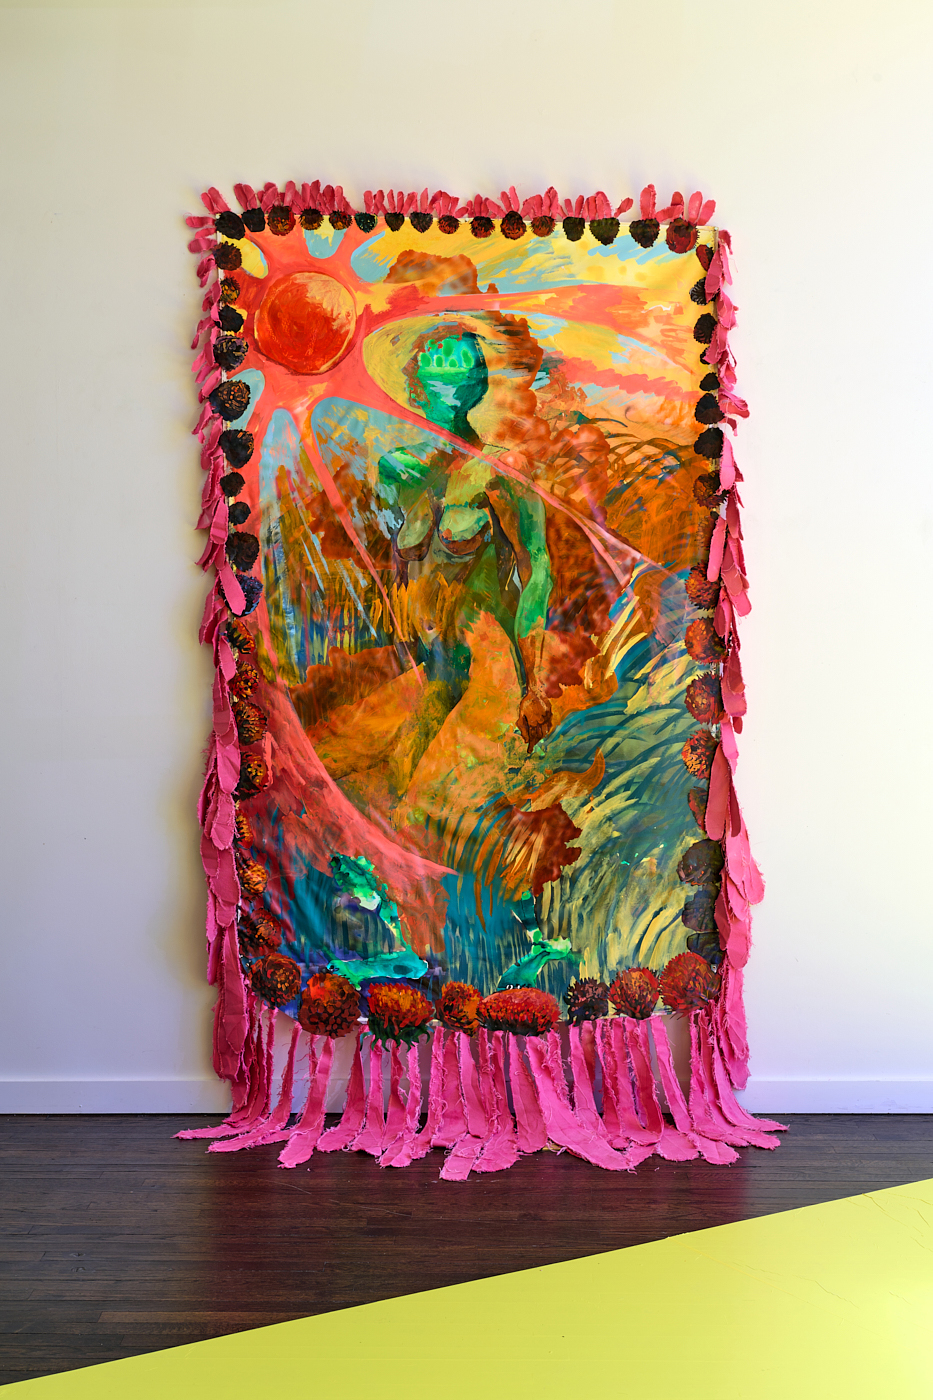 Mixed-media artwork featuring a green humanlike figure among a colorful landscape under a bright red sun surrounded by bright pink fabric fringe  